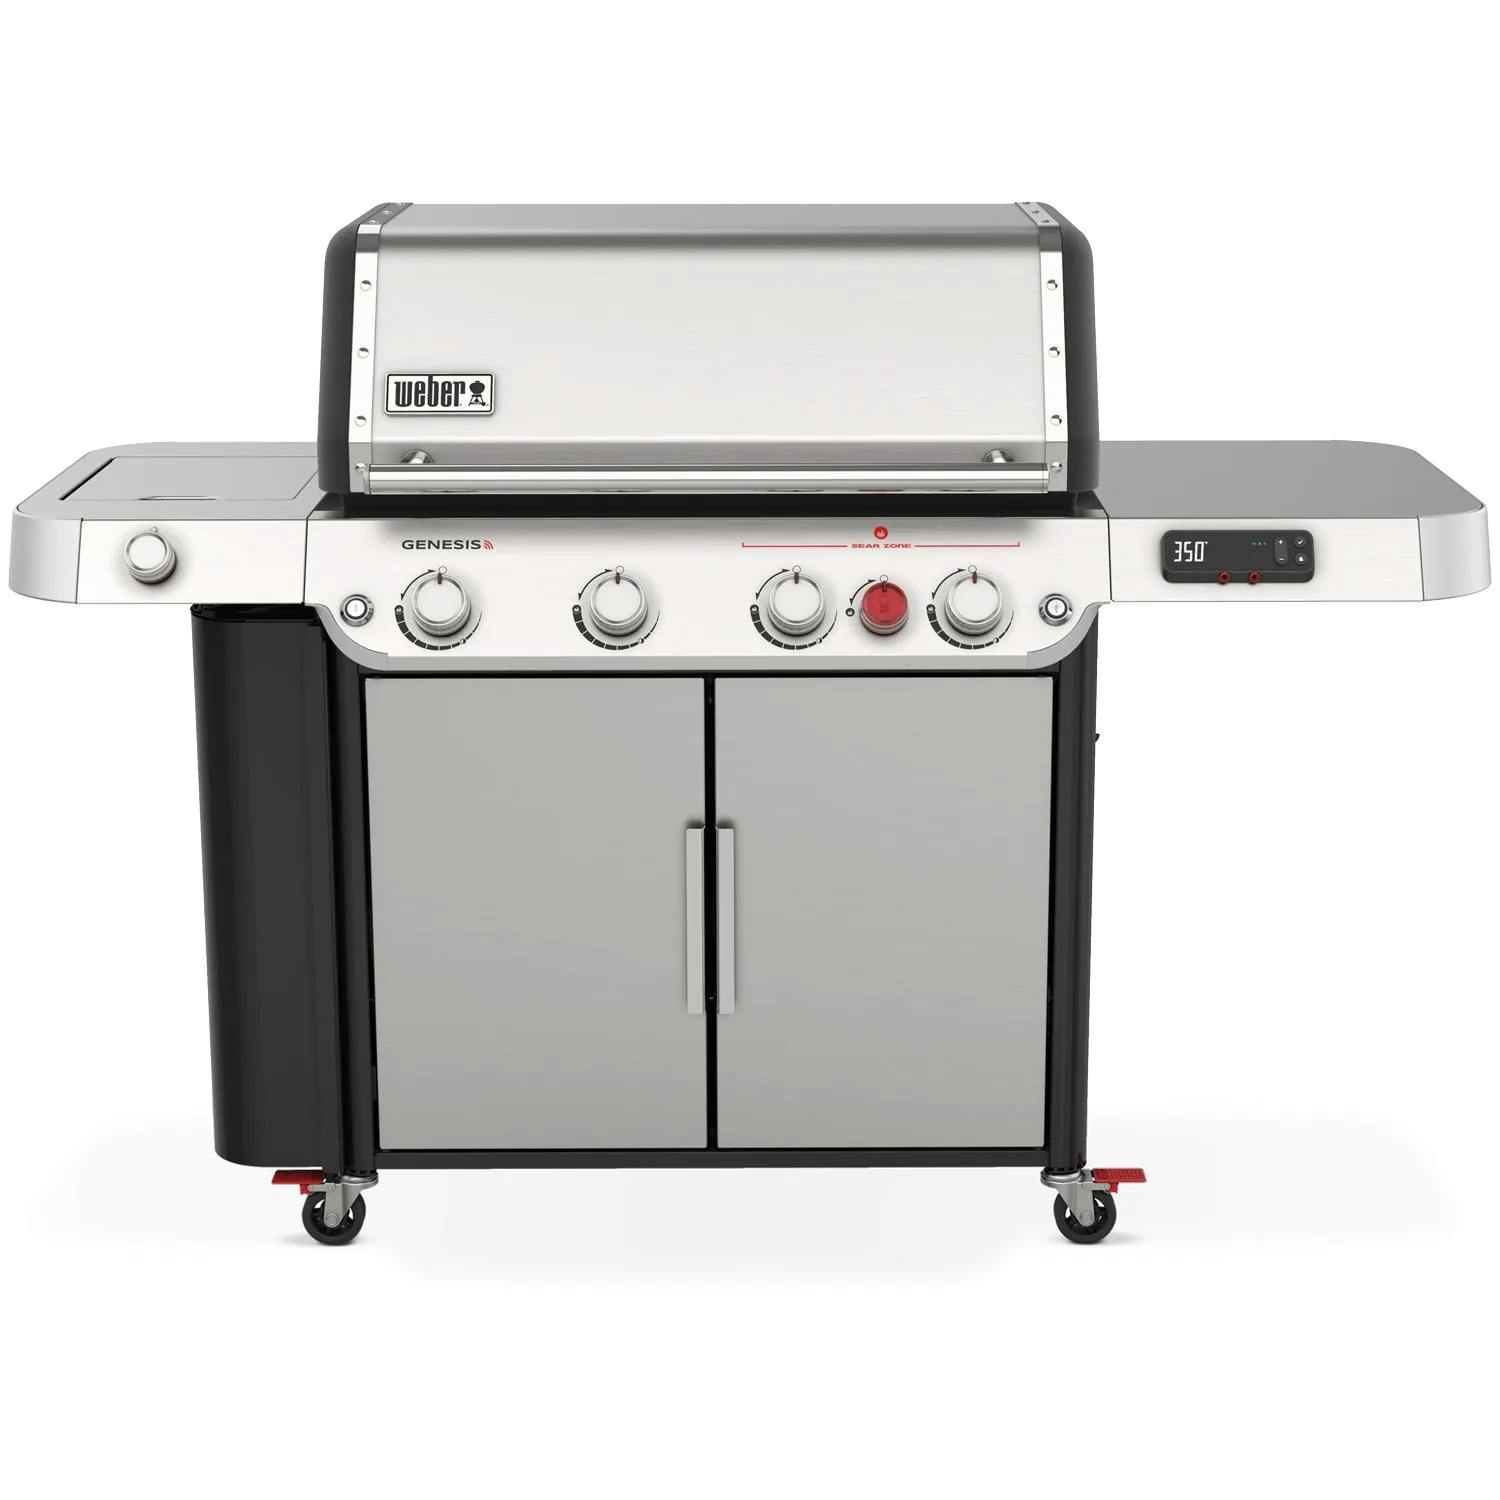 Weber New Genesis SPX-435 Gas Smart Grill with Sear Burner and Side BurnerStainless Steel · Propane